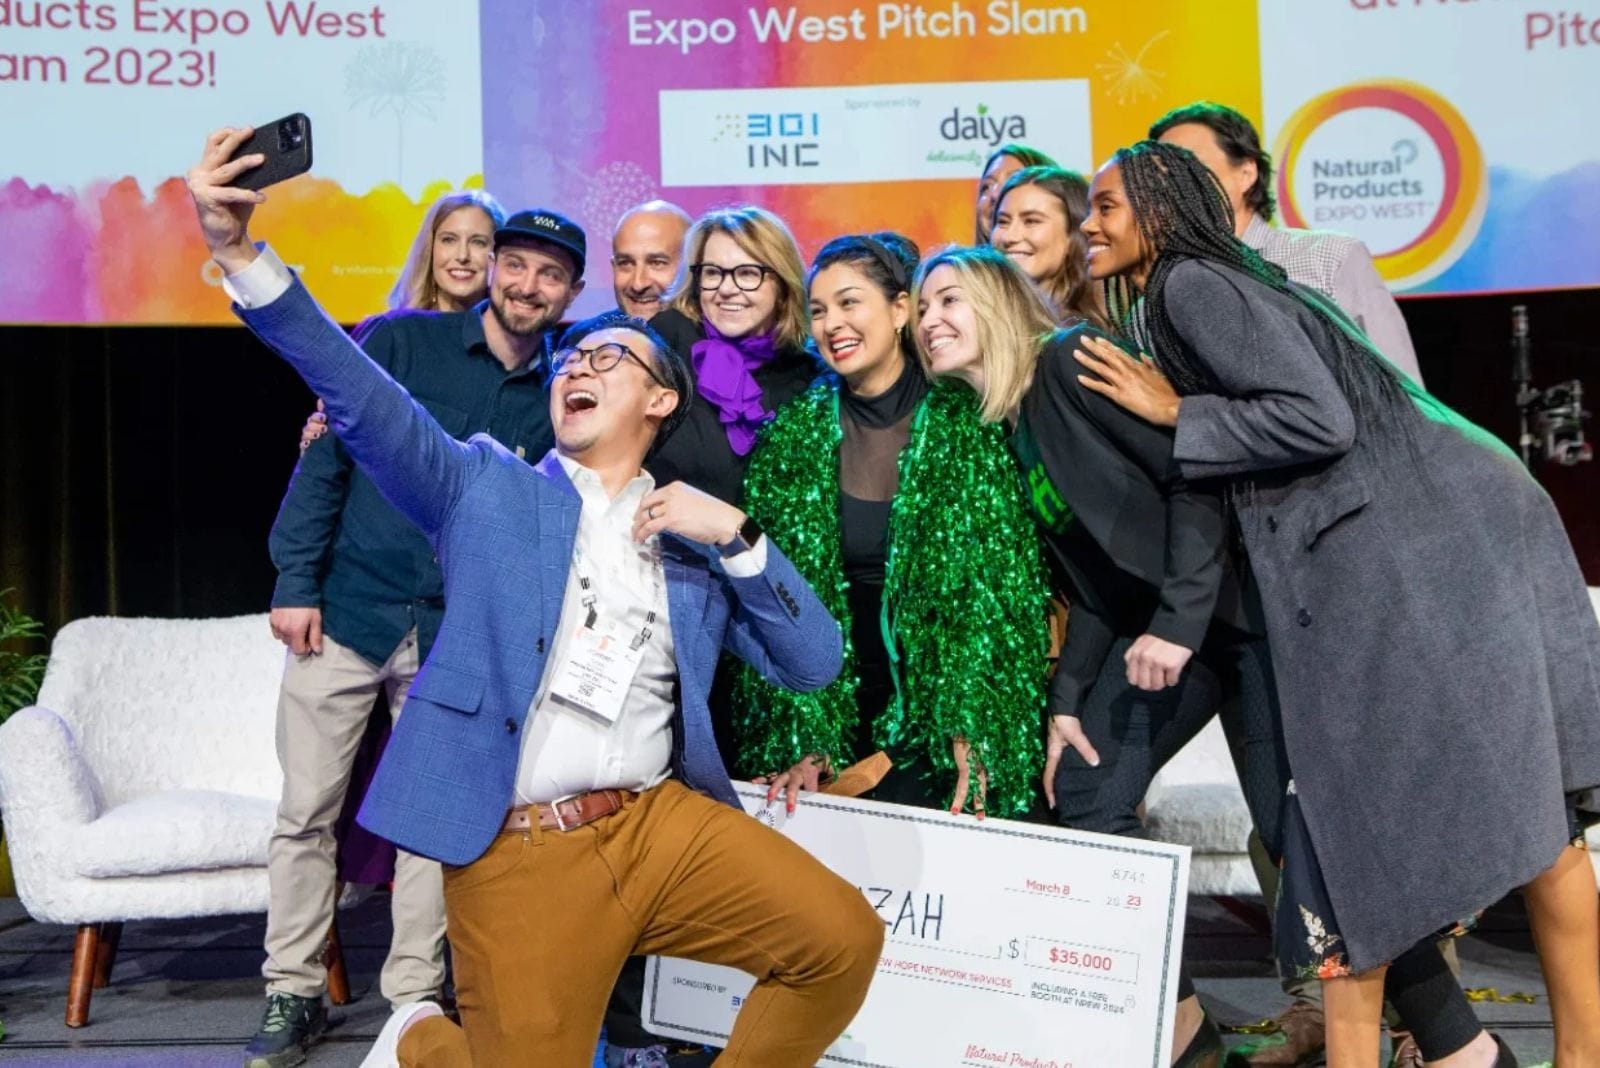 Group of people take selfie during Natural Products Expo West Pitch Slam 2023